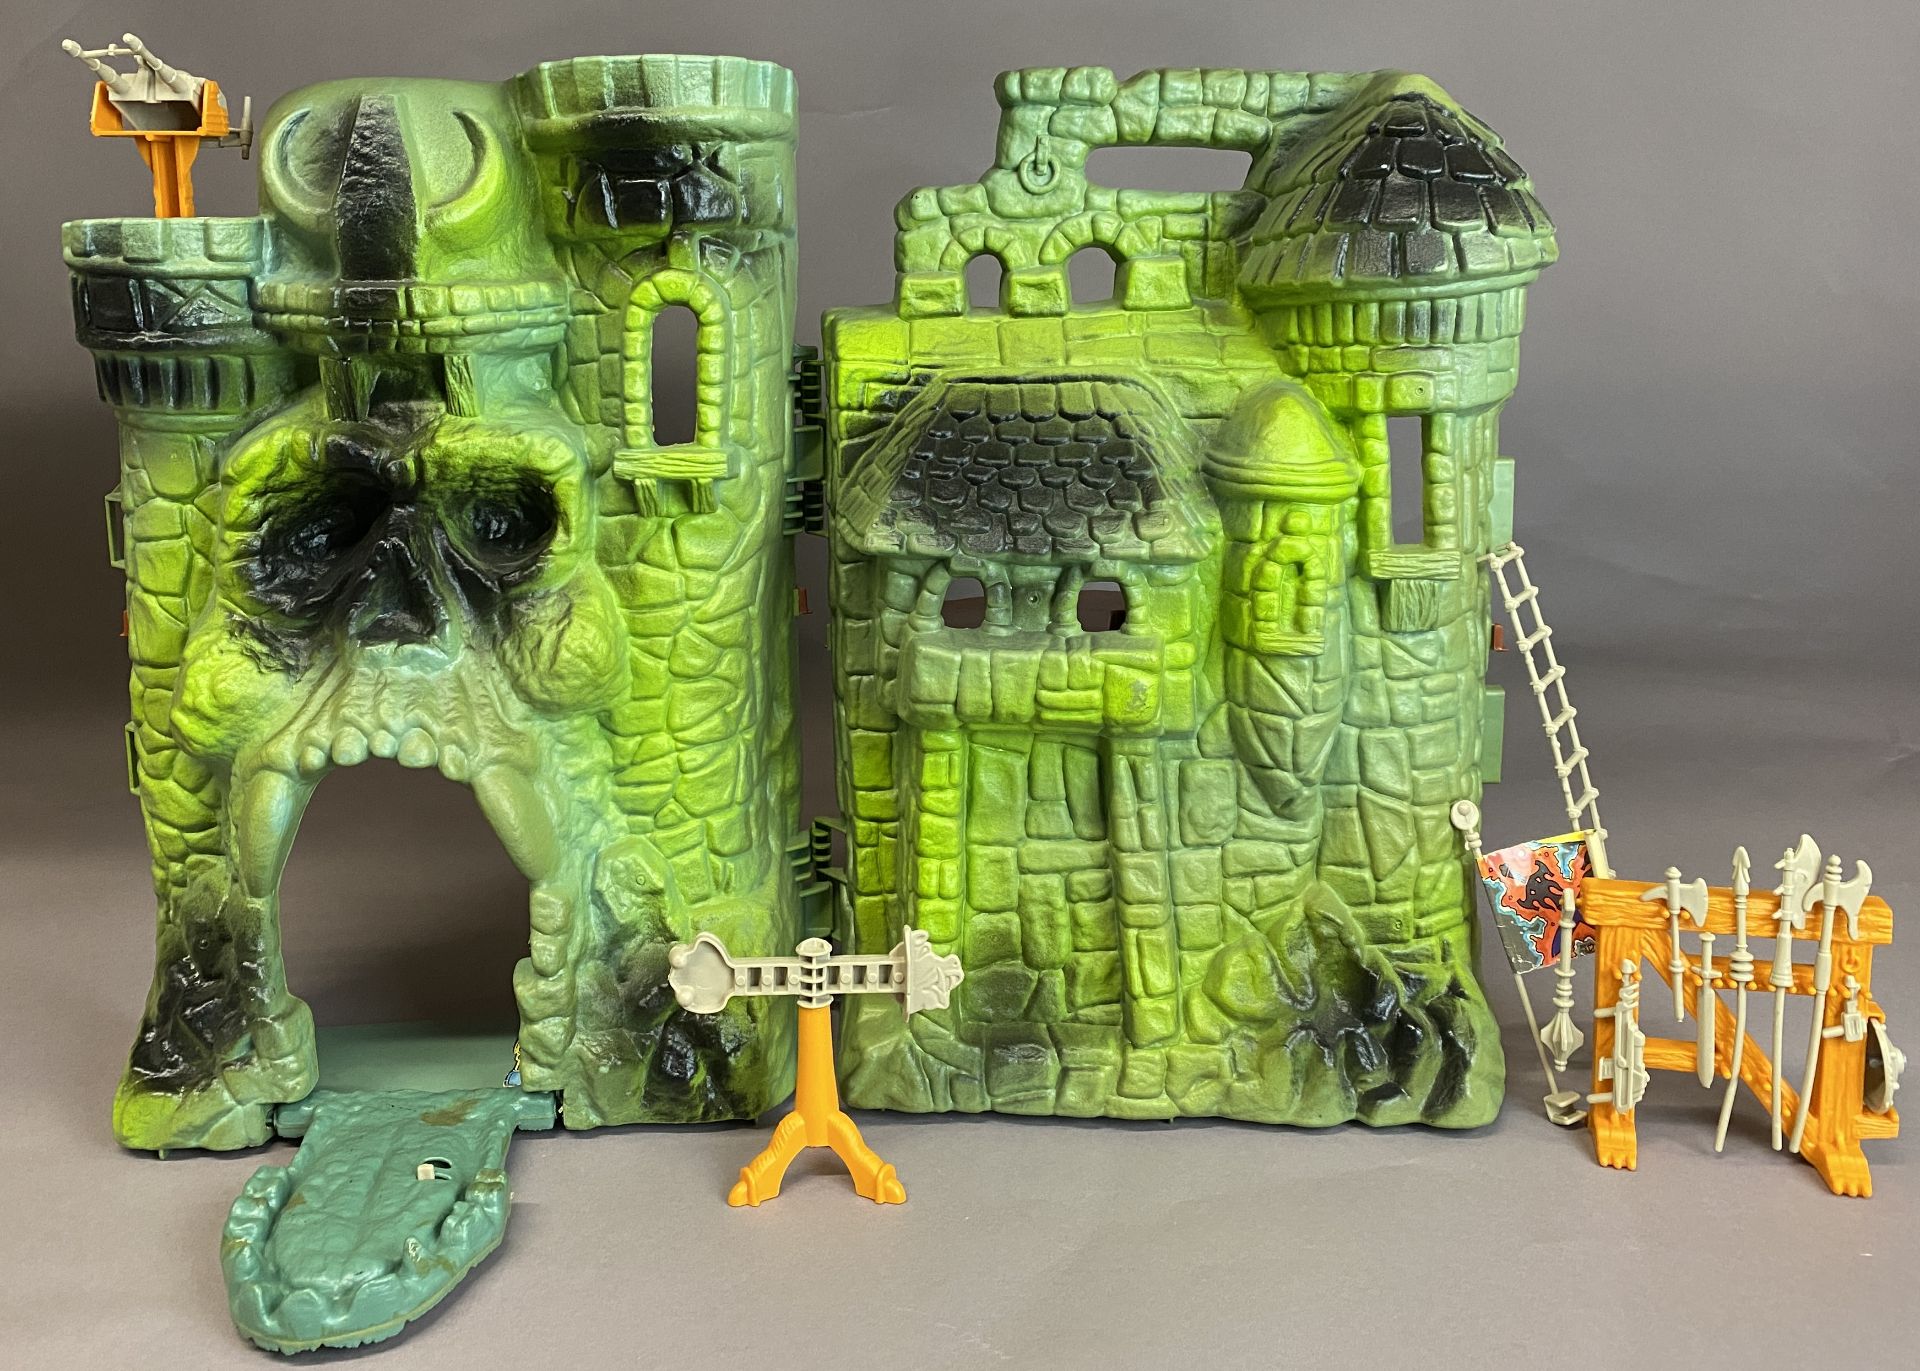 CASTLE GRAYSKULL - Vintage Masters of the Universe Playset (MOTU) - Complete with all accessories - Image 2 of 12